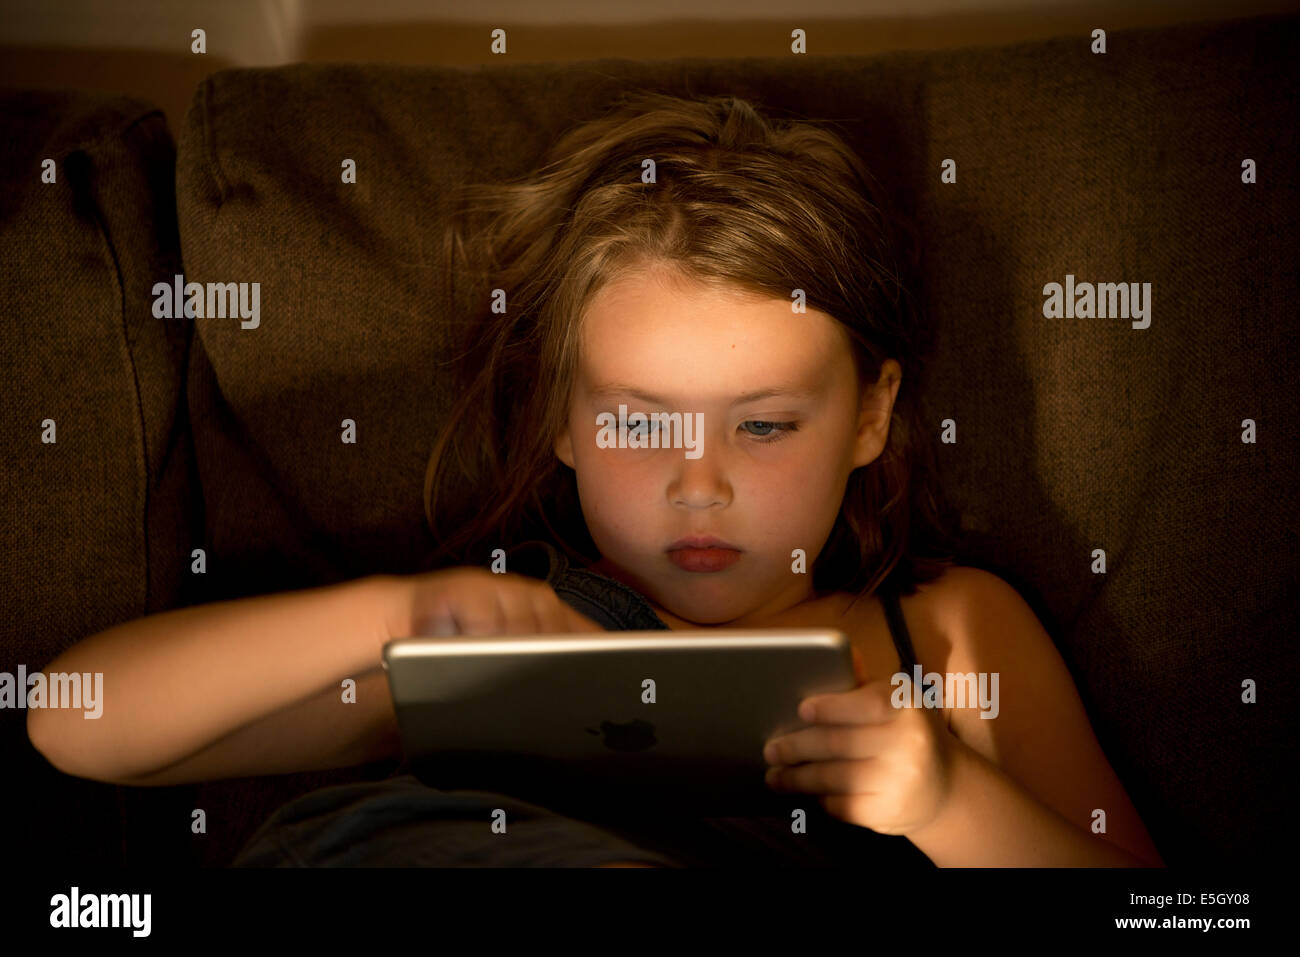 Six year old girl using an ipad mini tablet computer at home. Stock Photo